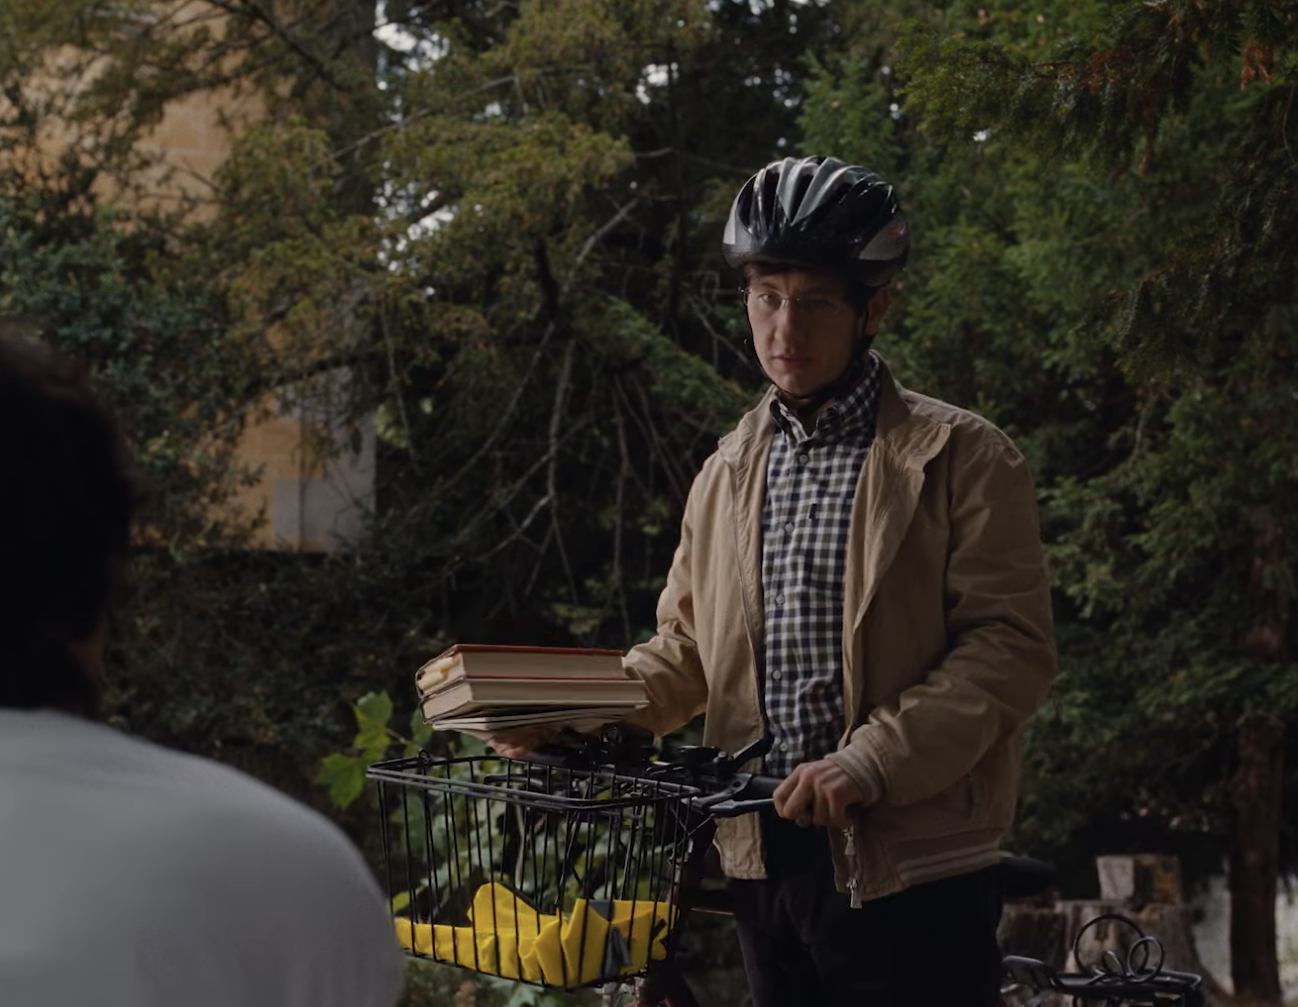 oliver on a bike carrying books